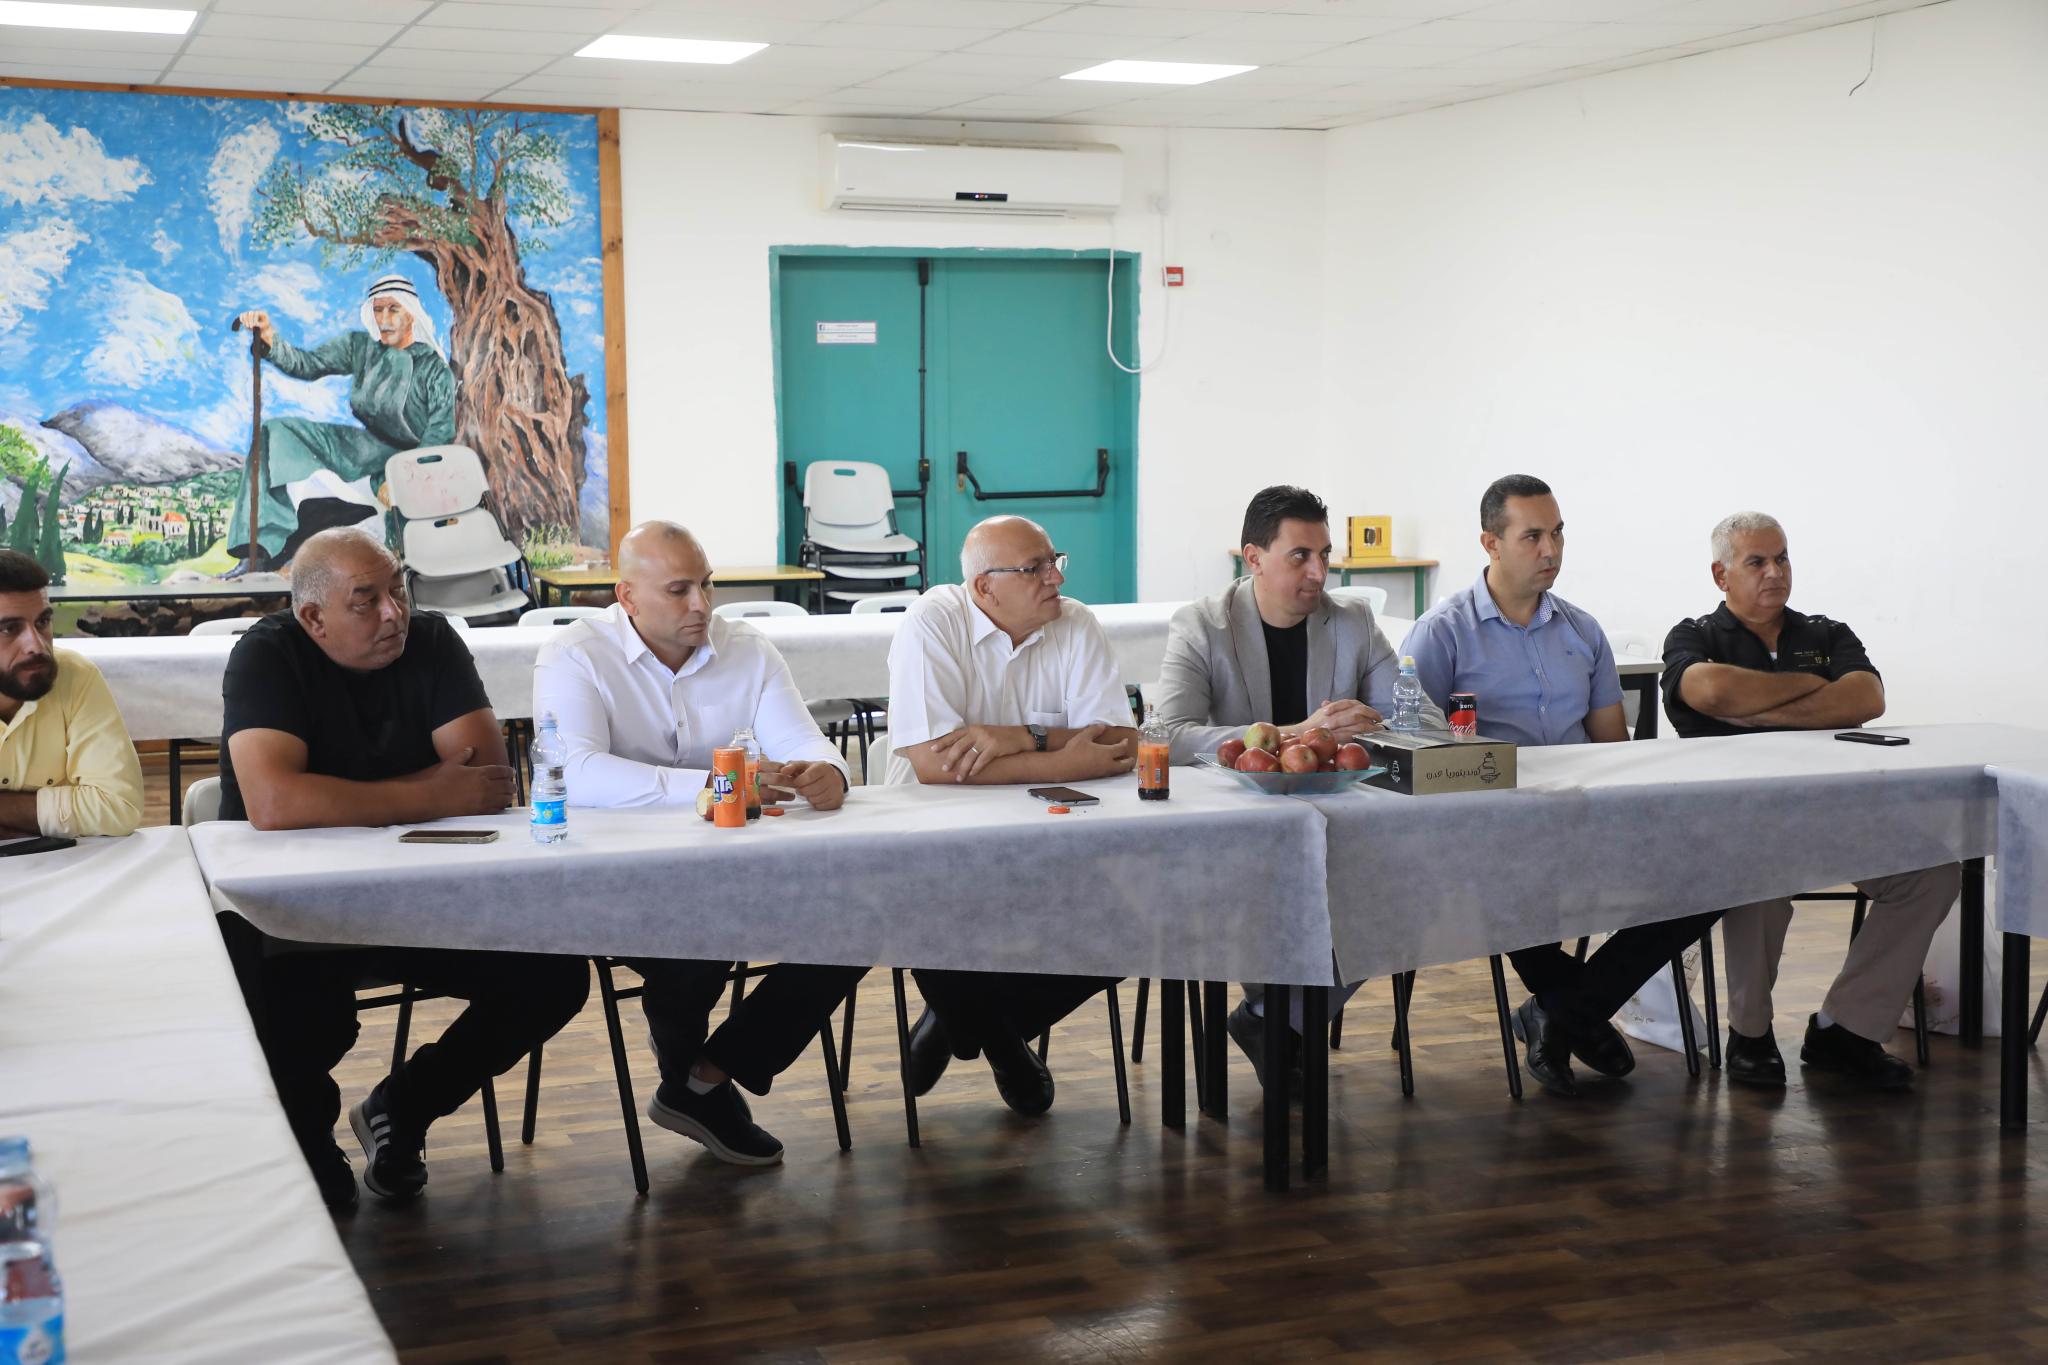 An AAUP Delegation Visits the Daburiya Local Council and the Village Comprehensive School in the Occupied Palestinian Territory